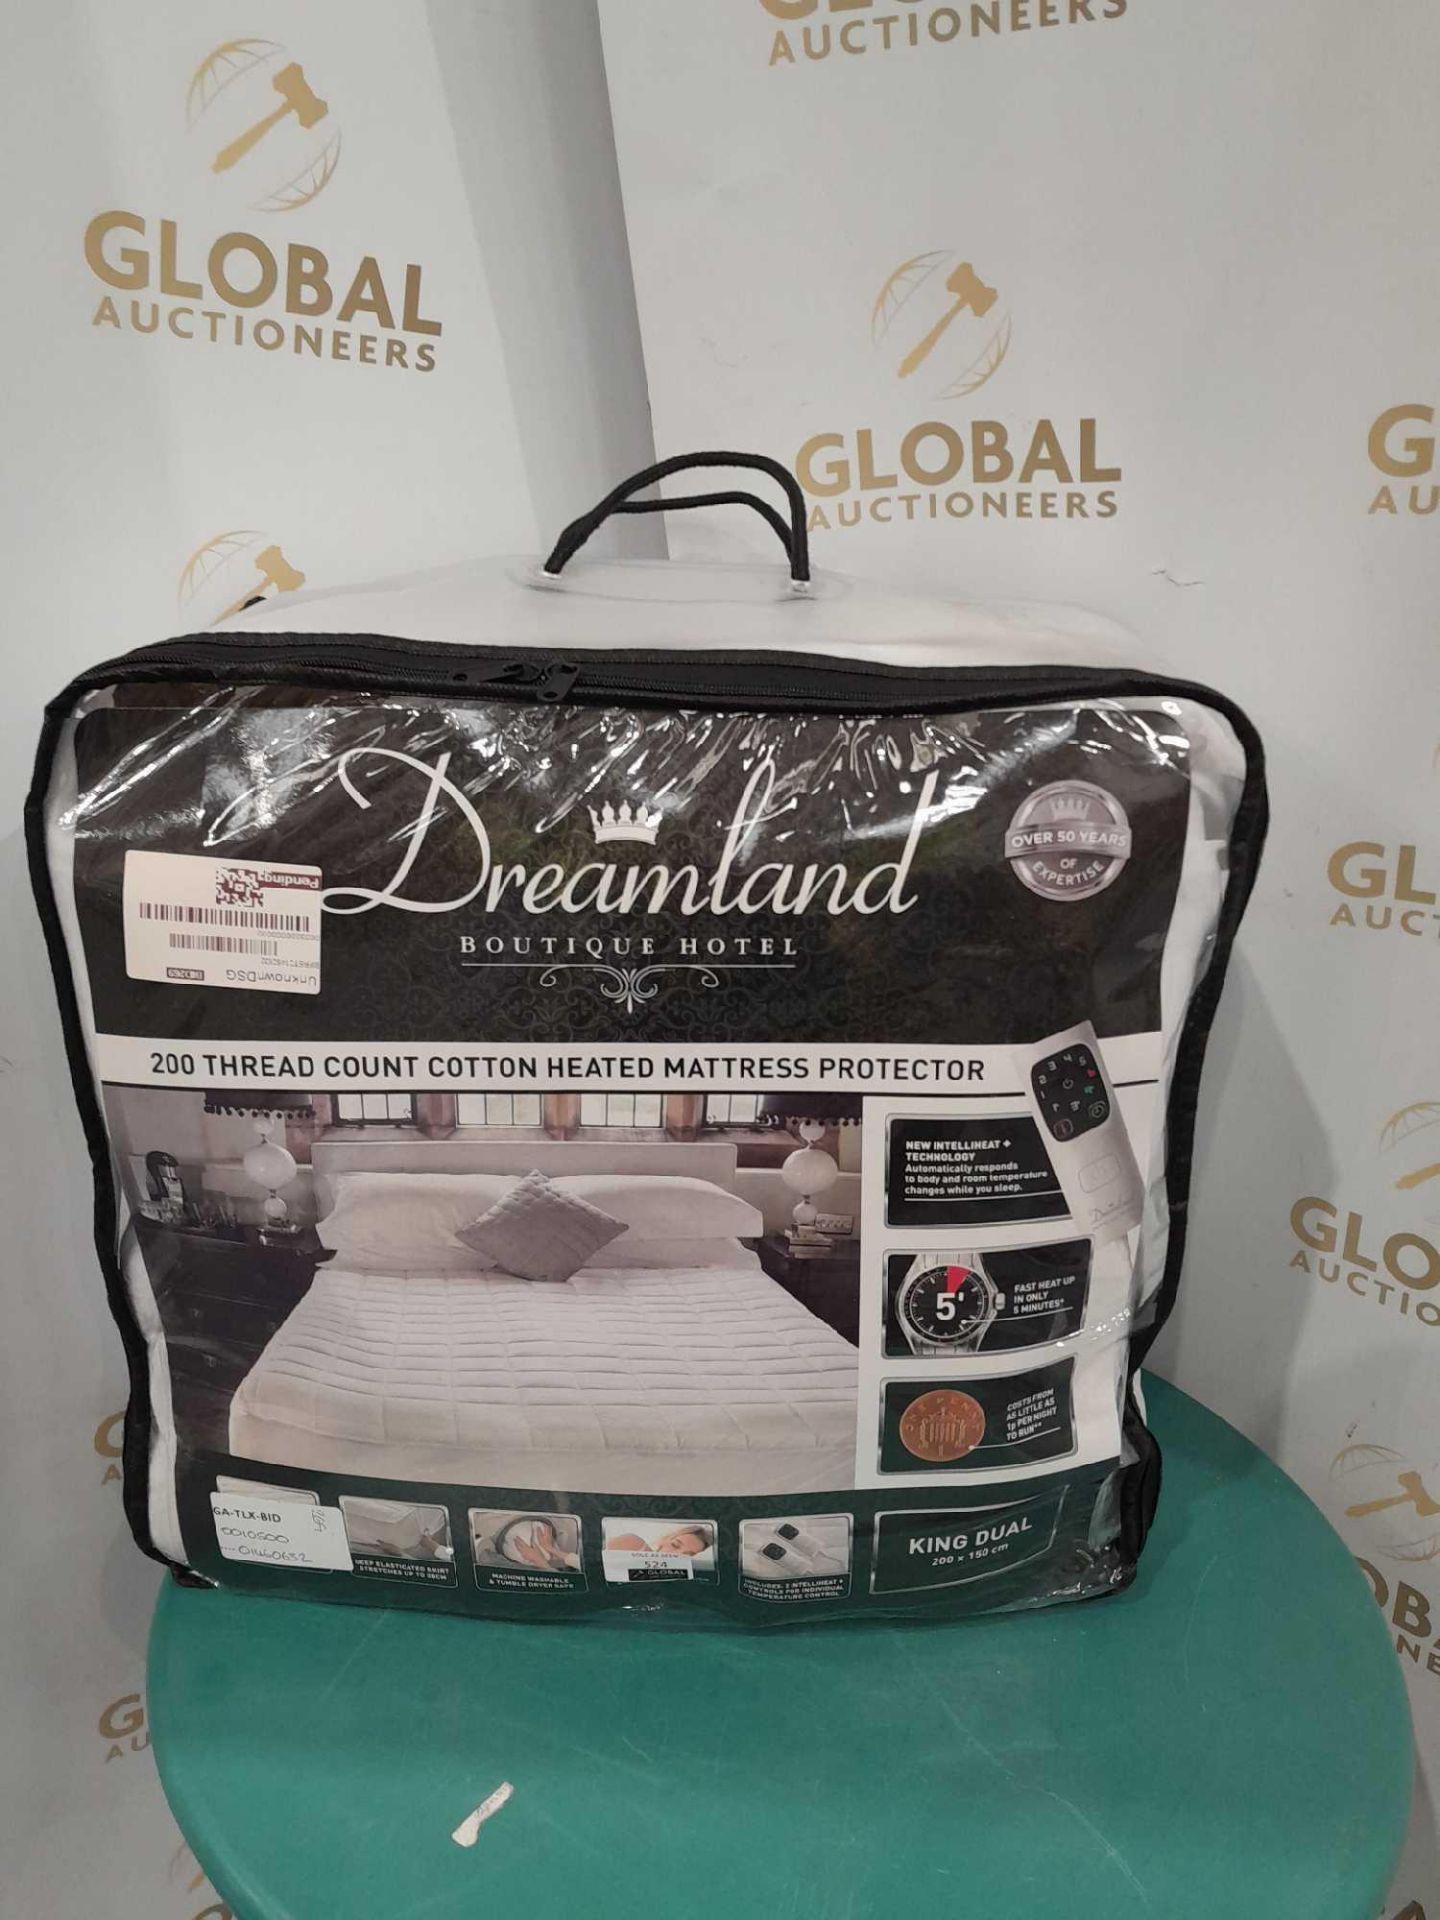 RRP £125 Bagged Dreamland 200 Thread Count Cotton Heated Mattress Protector - Image 2 of 2